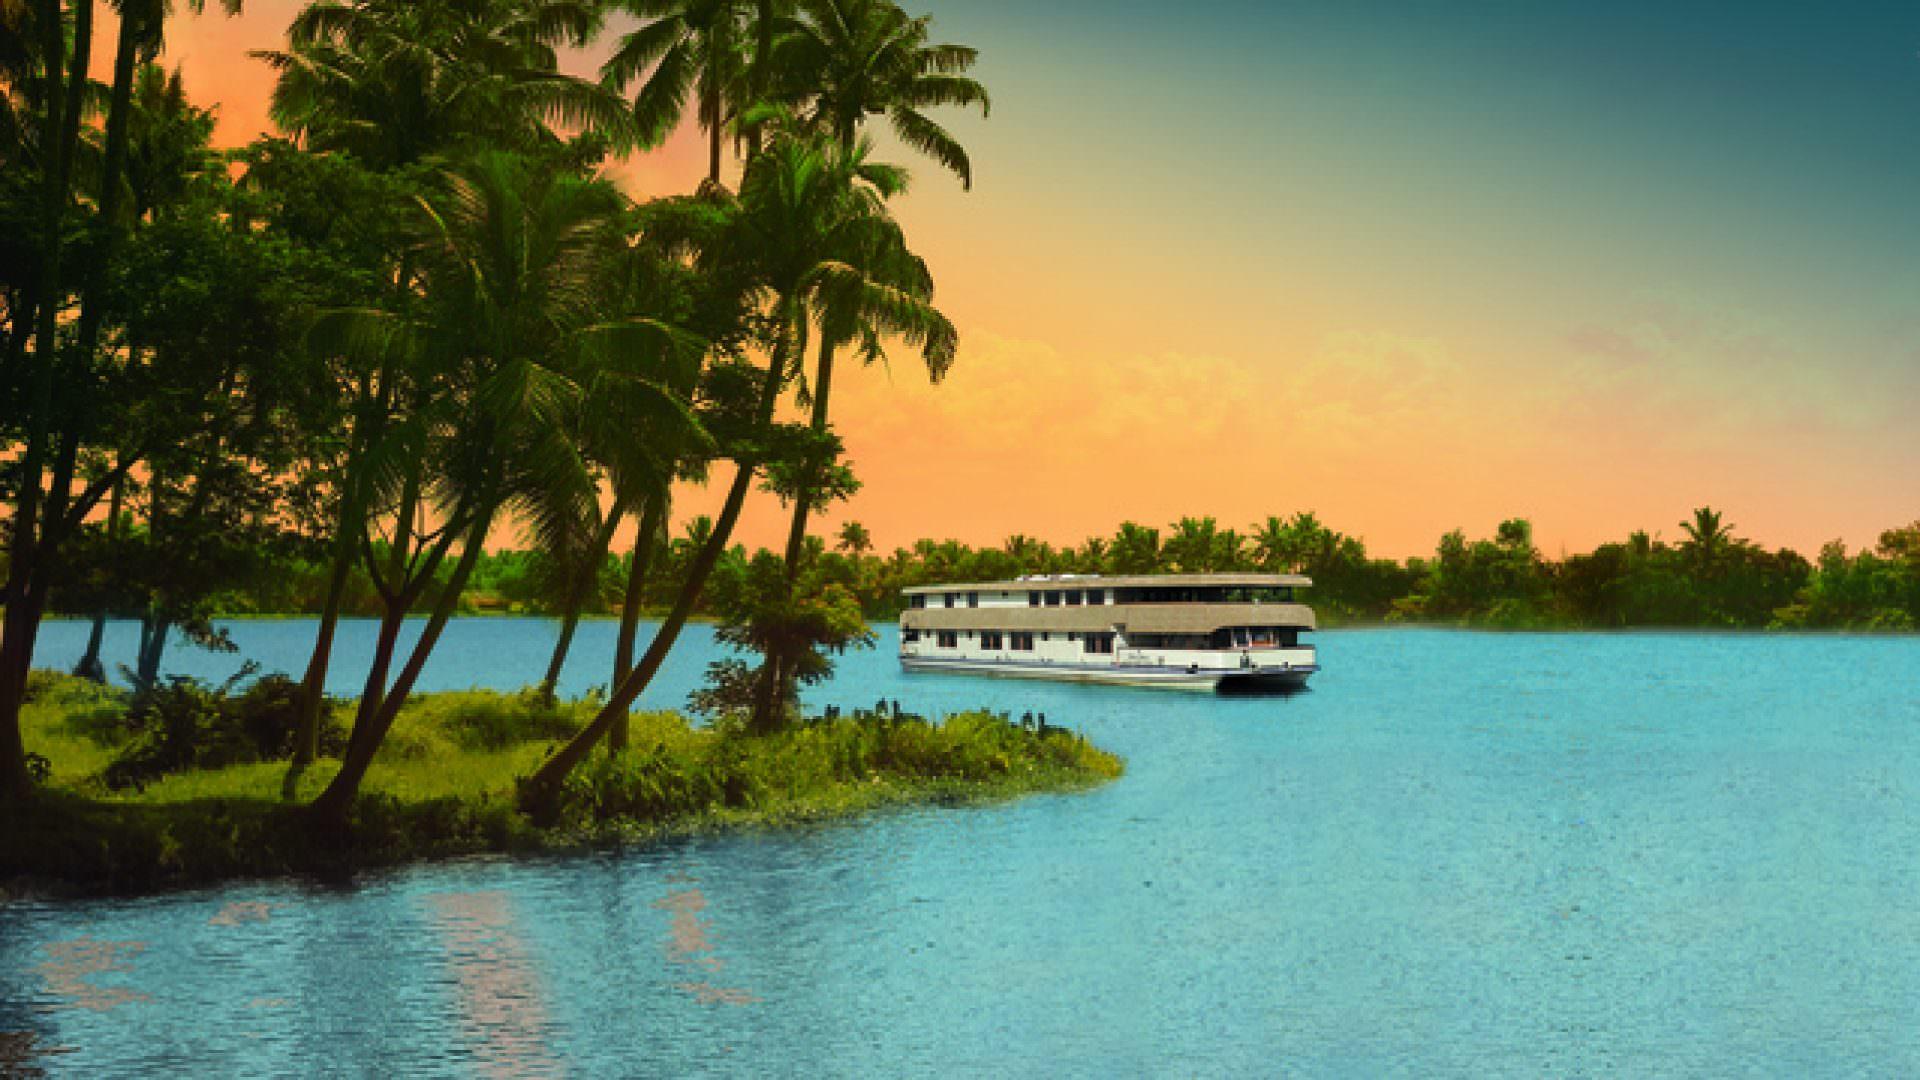 Gods Own Country Escape to Kerala Backwaters